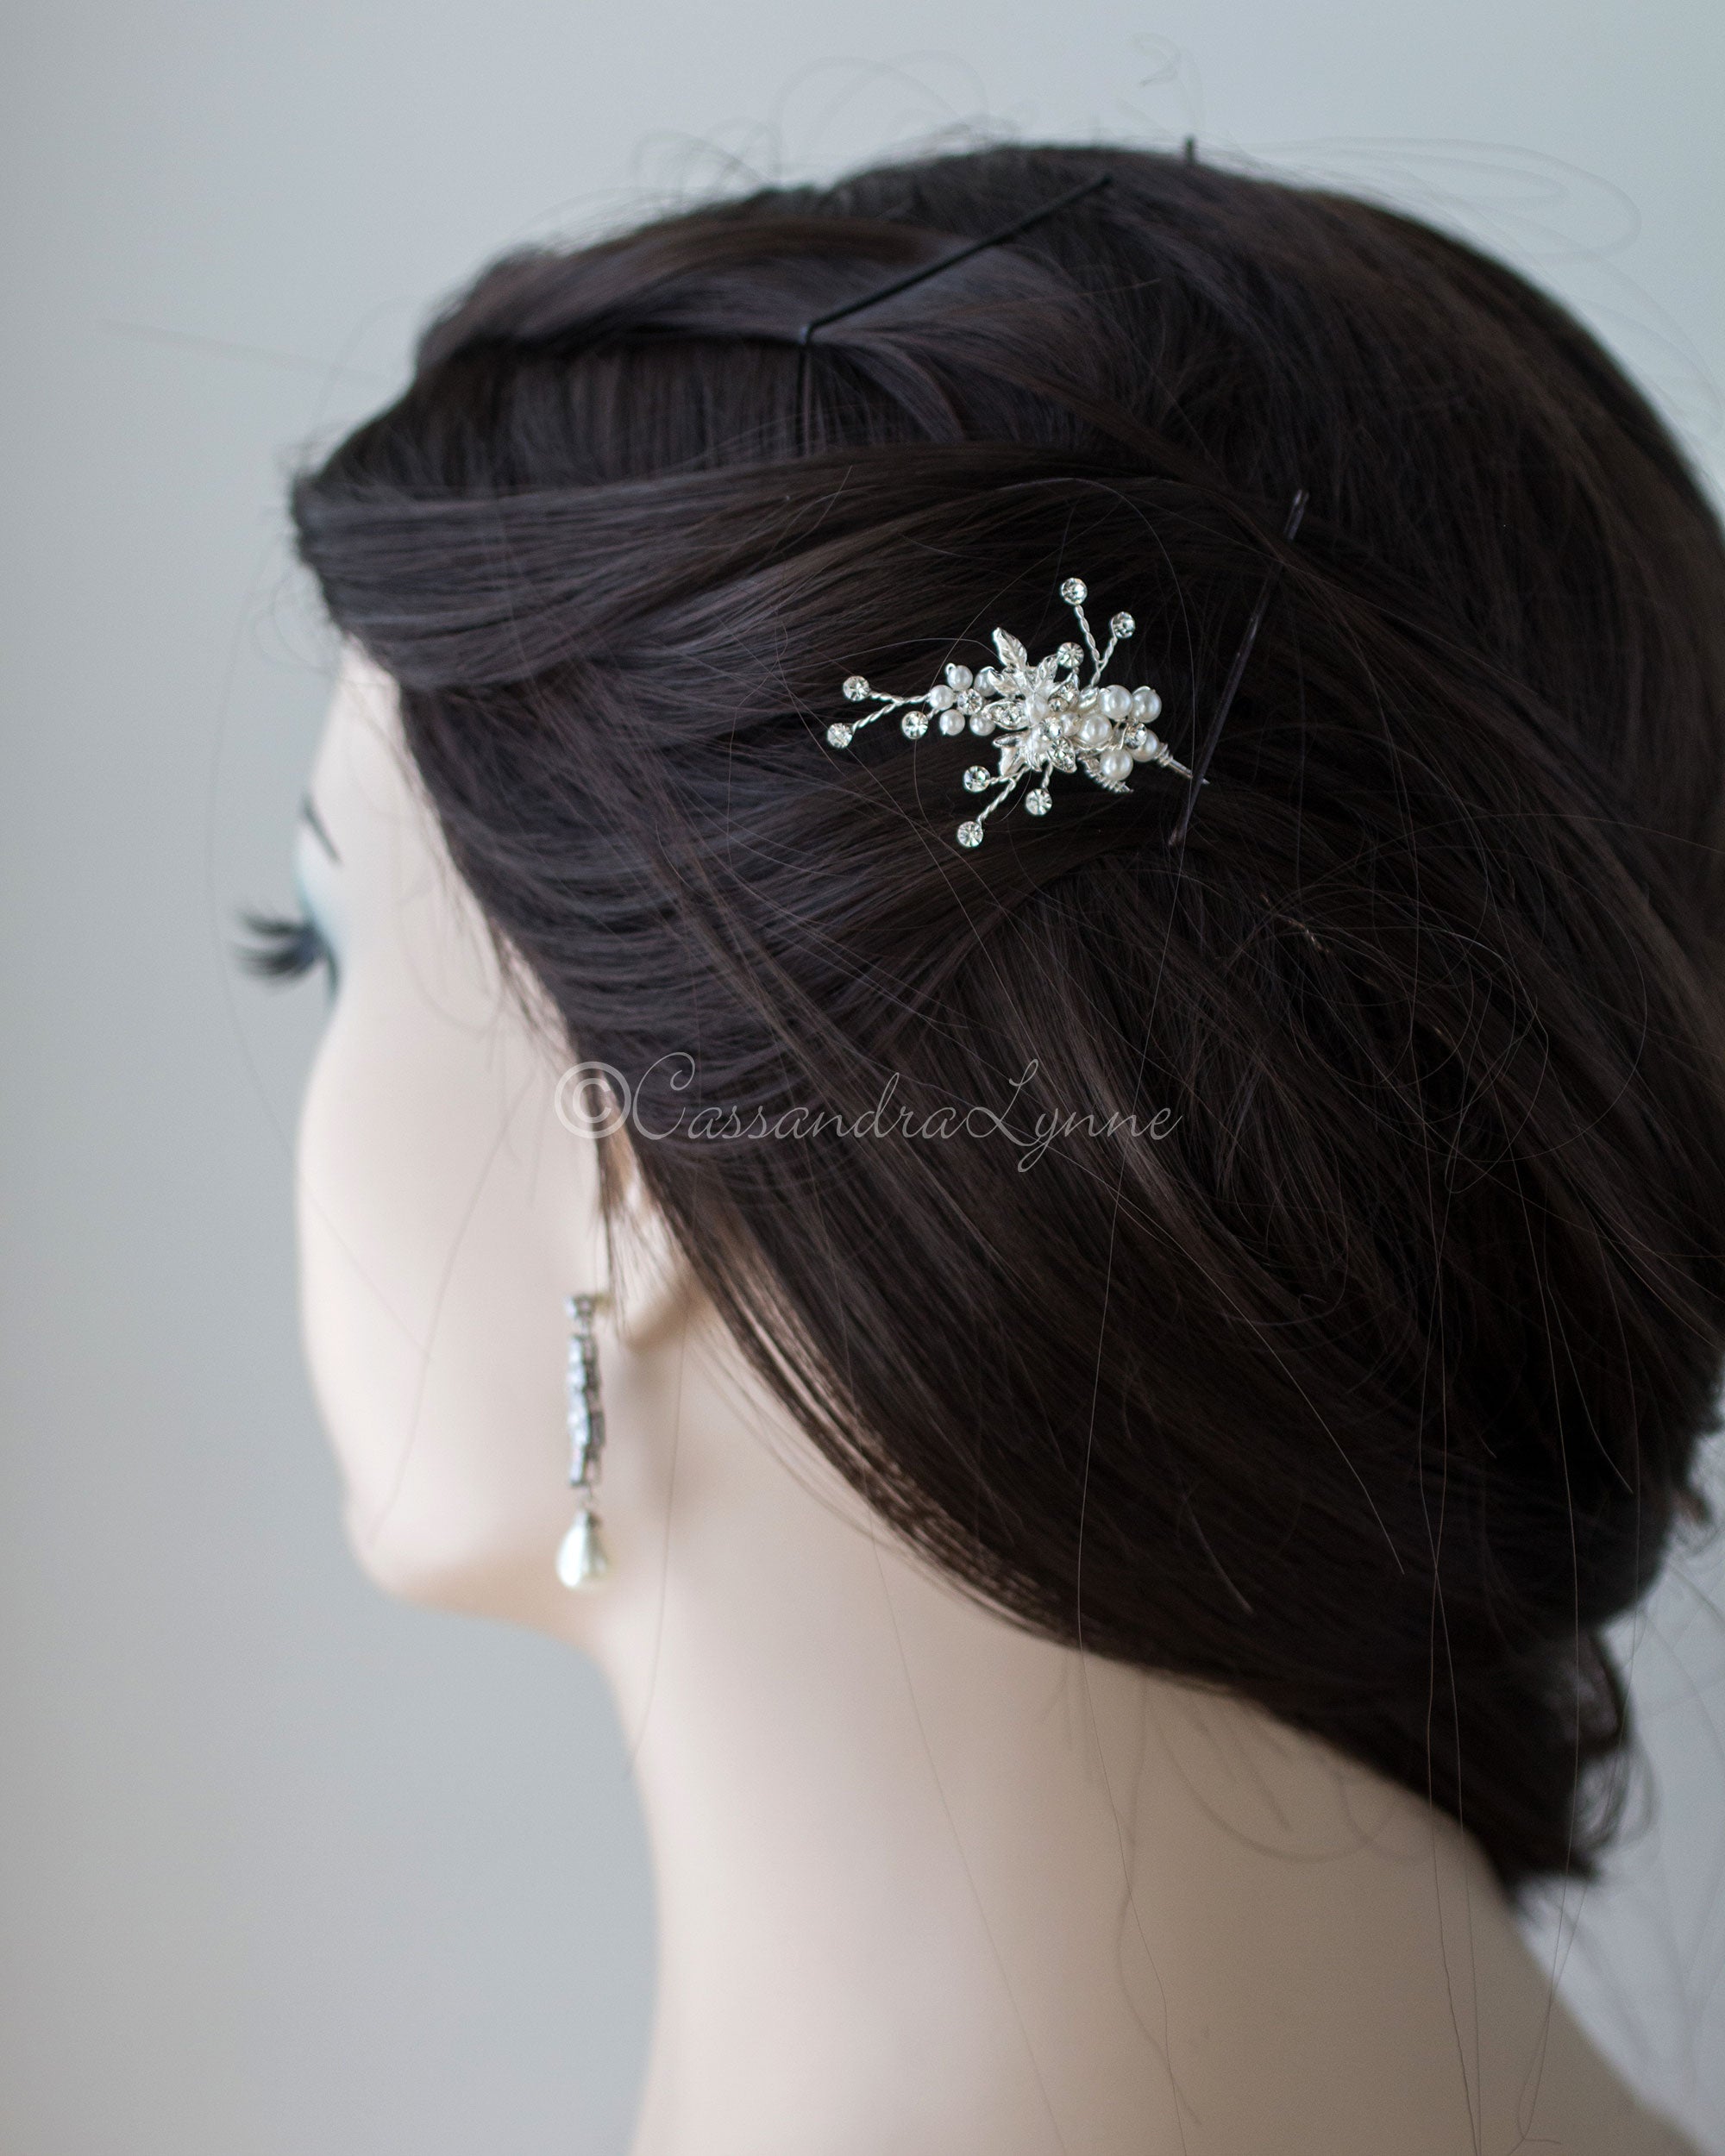 Delicate Bridal Hair Pin with Pearls - Cassandra Lynne